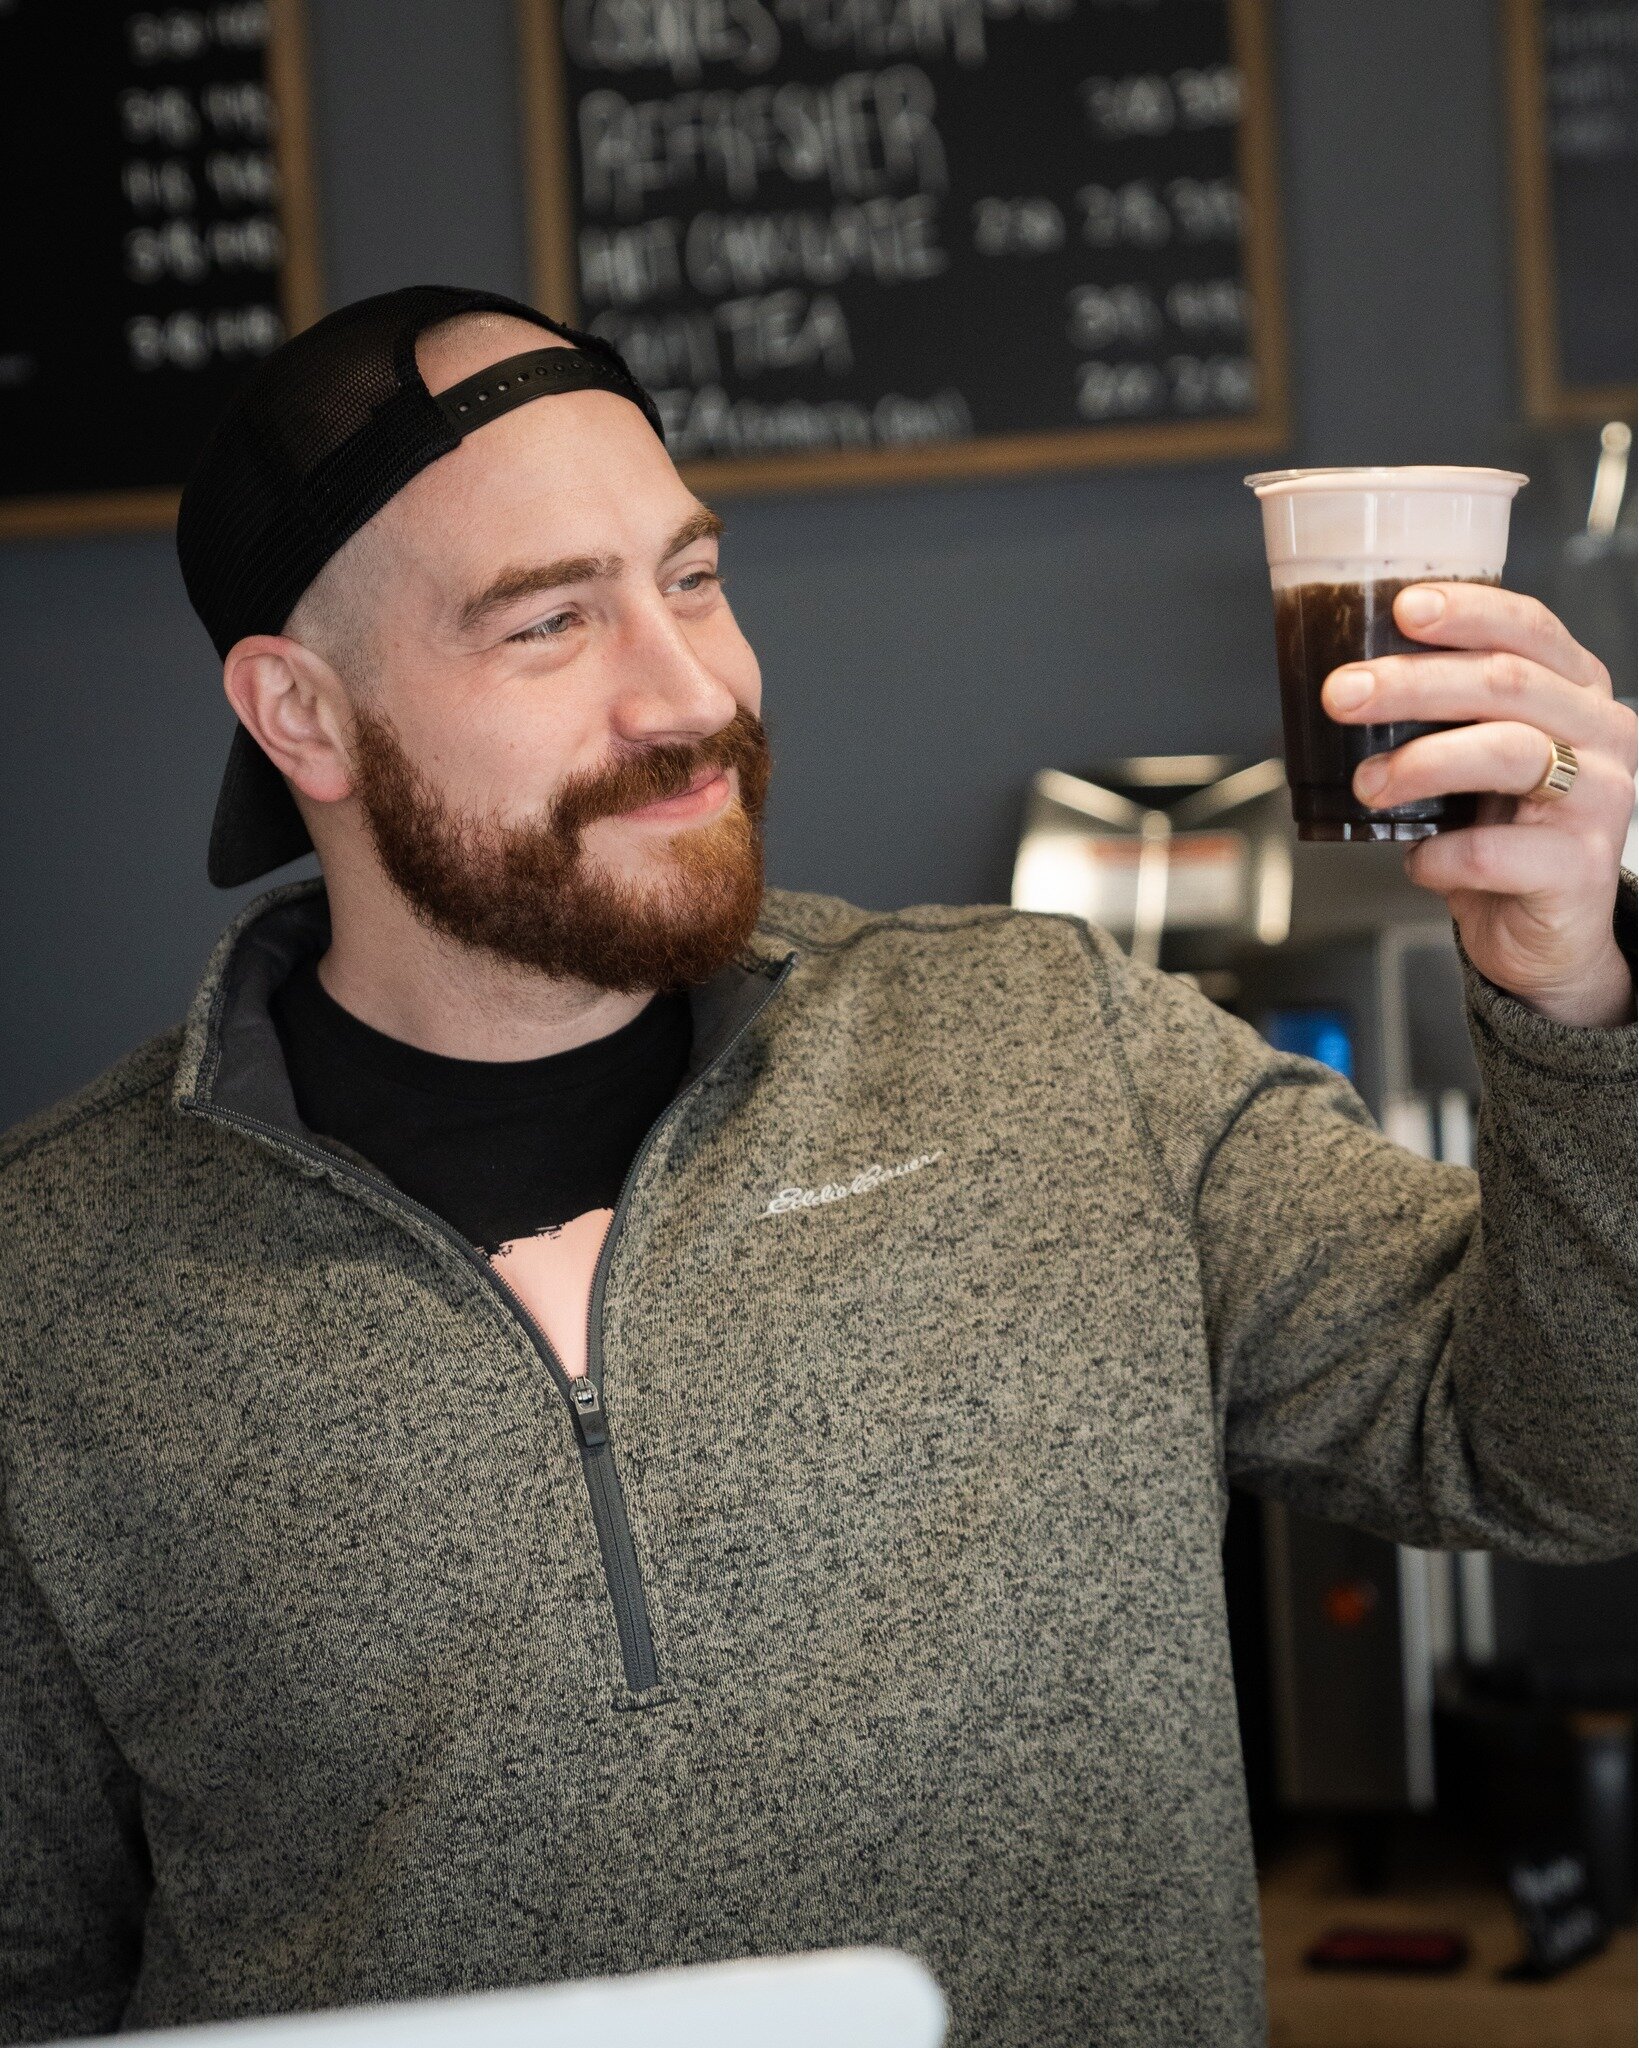 This Valentines find someone that looks at you the way Nick looks at his cold foam!

Spice up your Valentines weekend with a Lavender Vanilla Spice
Cold Foam. ❤

____

&bull;

&bull;

#groundedcoffeeandcrumbs #supportlocalbusiness
#crumbs #pauldingco